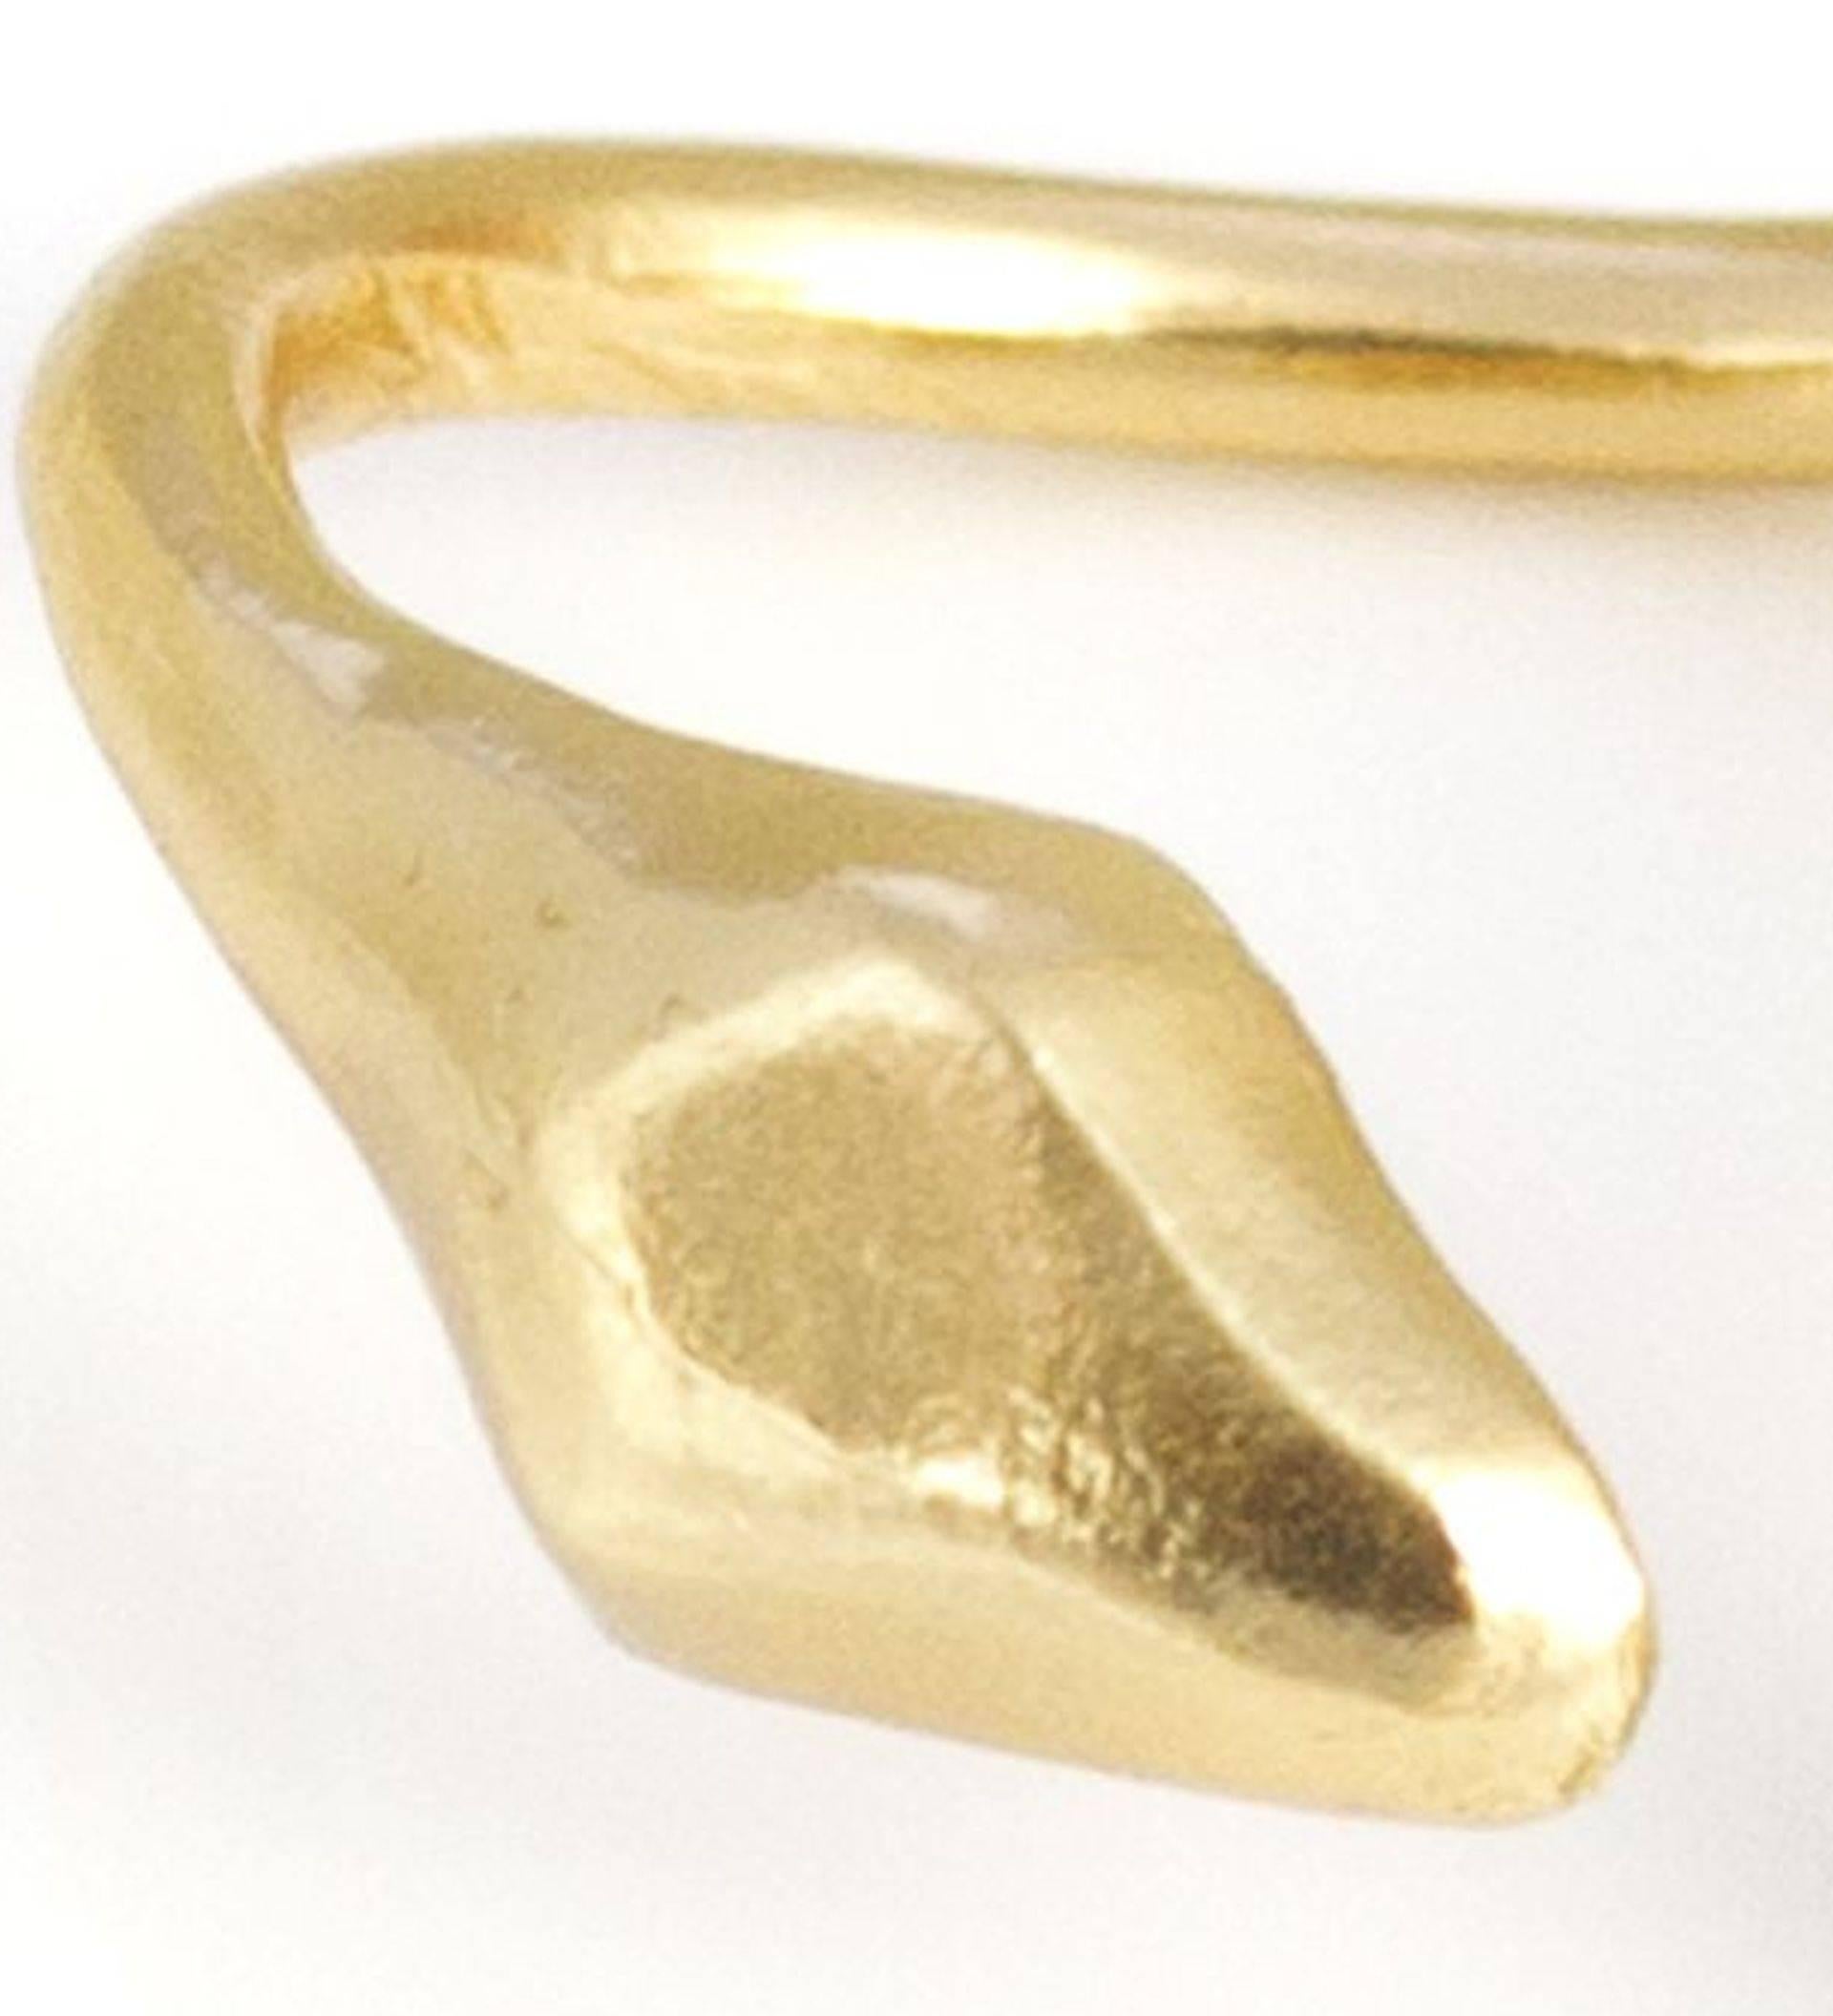 Giulia Barela' s gold plated bronze Ribbon ring

A snake gets comfortable between a few fingers, hold on tight creating a bond of strength.
  
Material: gold plated bronze
Weight: 9 gr 